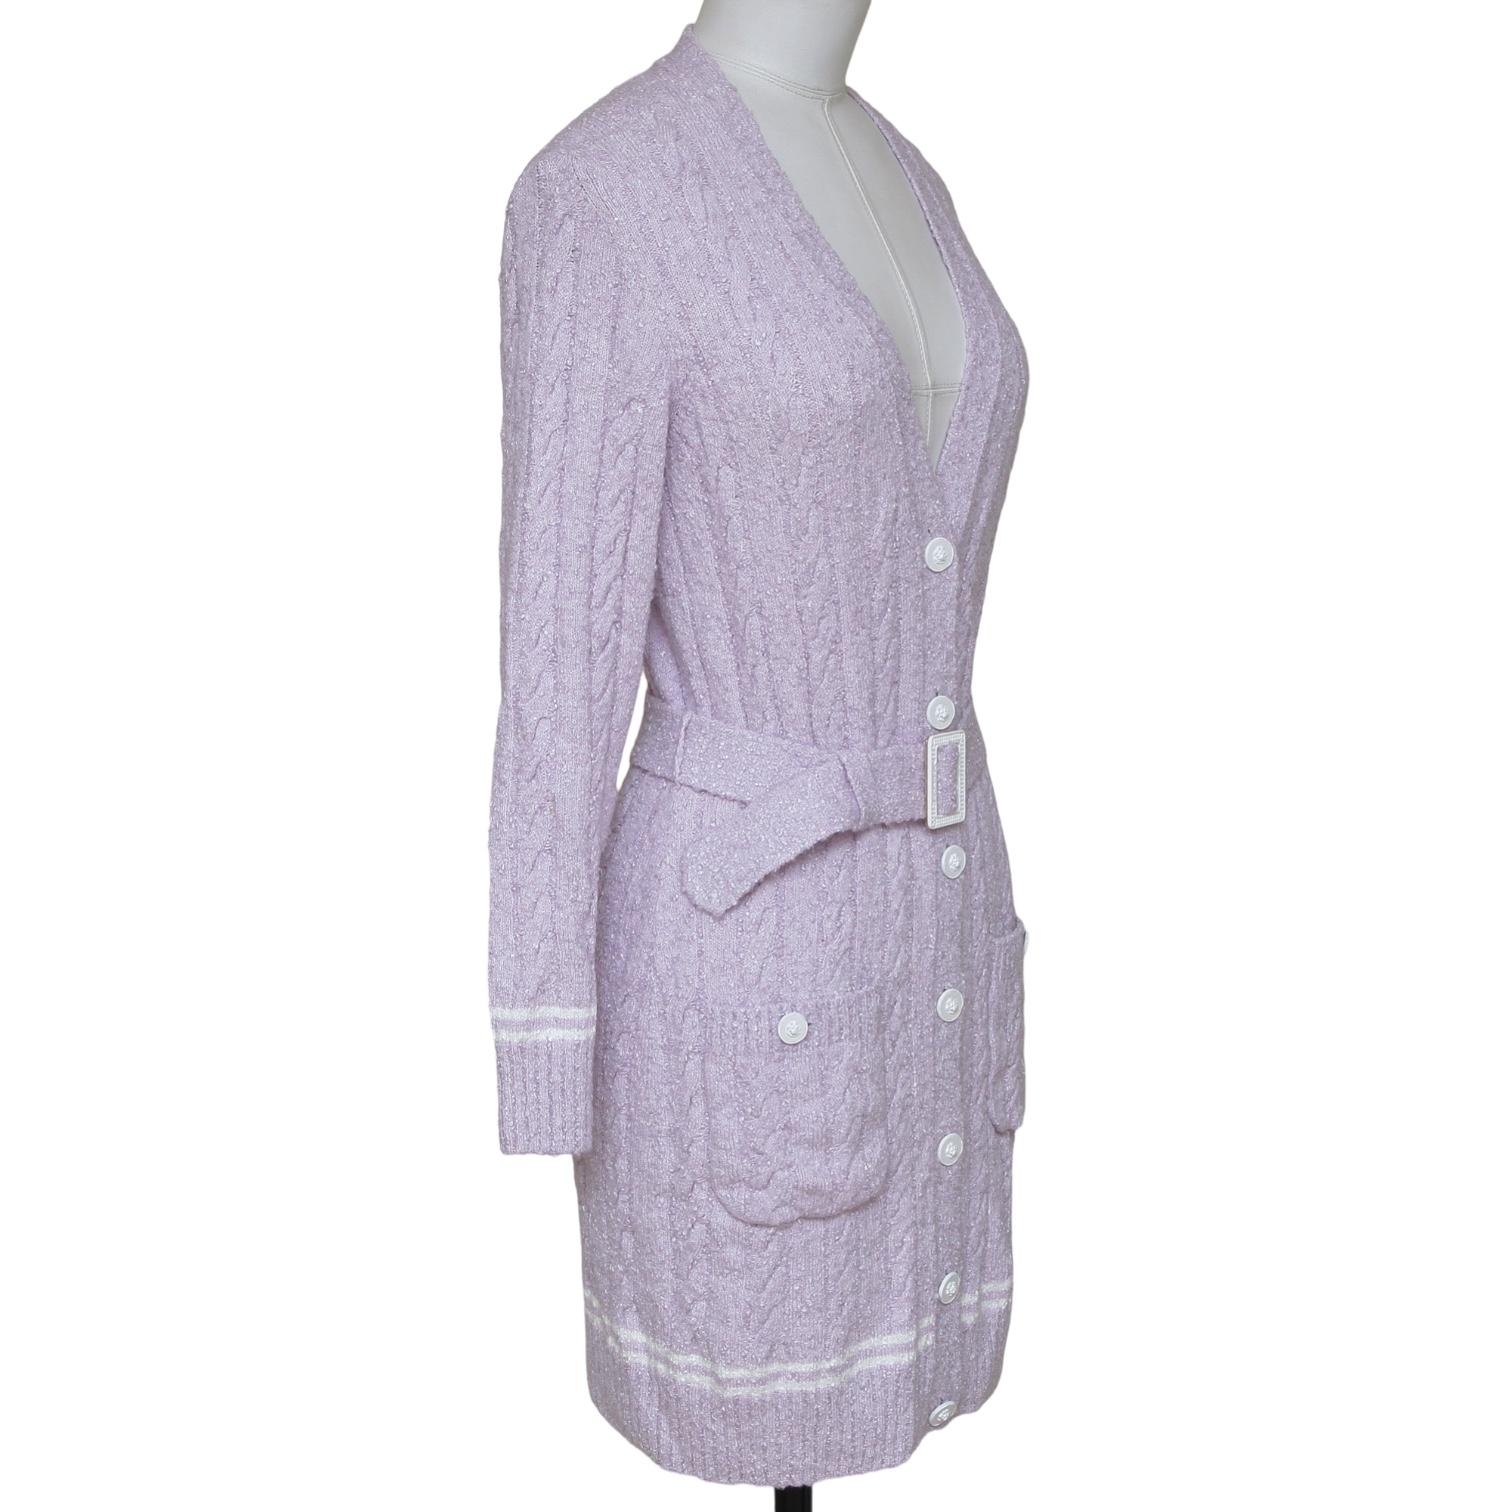 GUARANTEED AUTHENTIC CHANEL 22P LAVENDER LONG CARDIGAN

Design:
 - From the Spring 2022 collection lavender longer cardigan with white striped accent.
 - V-Neck.
 - Long Sleeve.
 - Button Down.
 - Detachable belt.
 - Dual patch pockets at hips.
 -